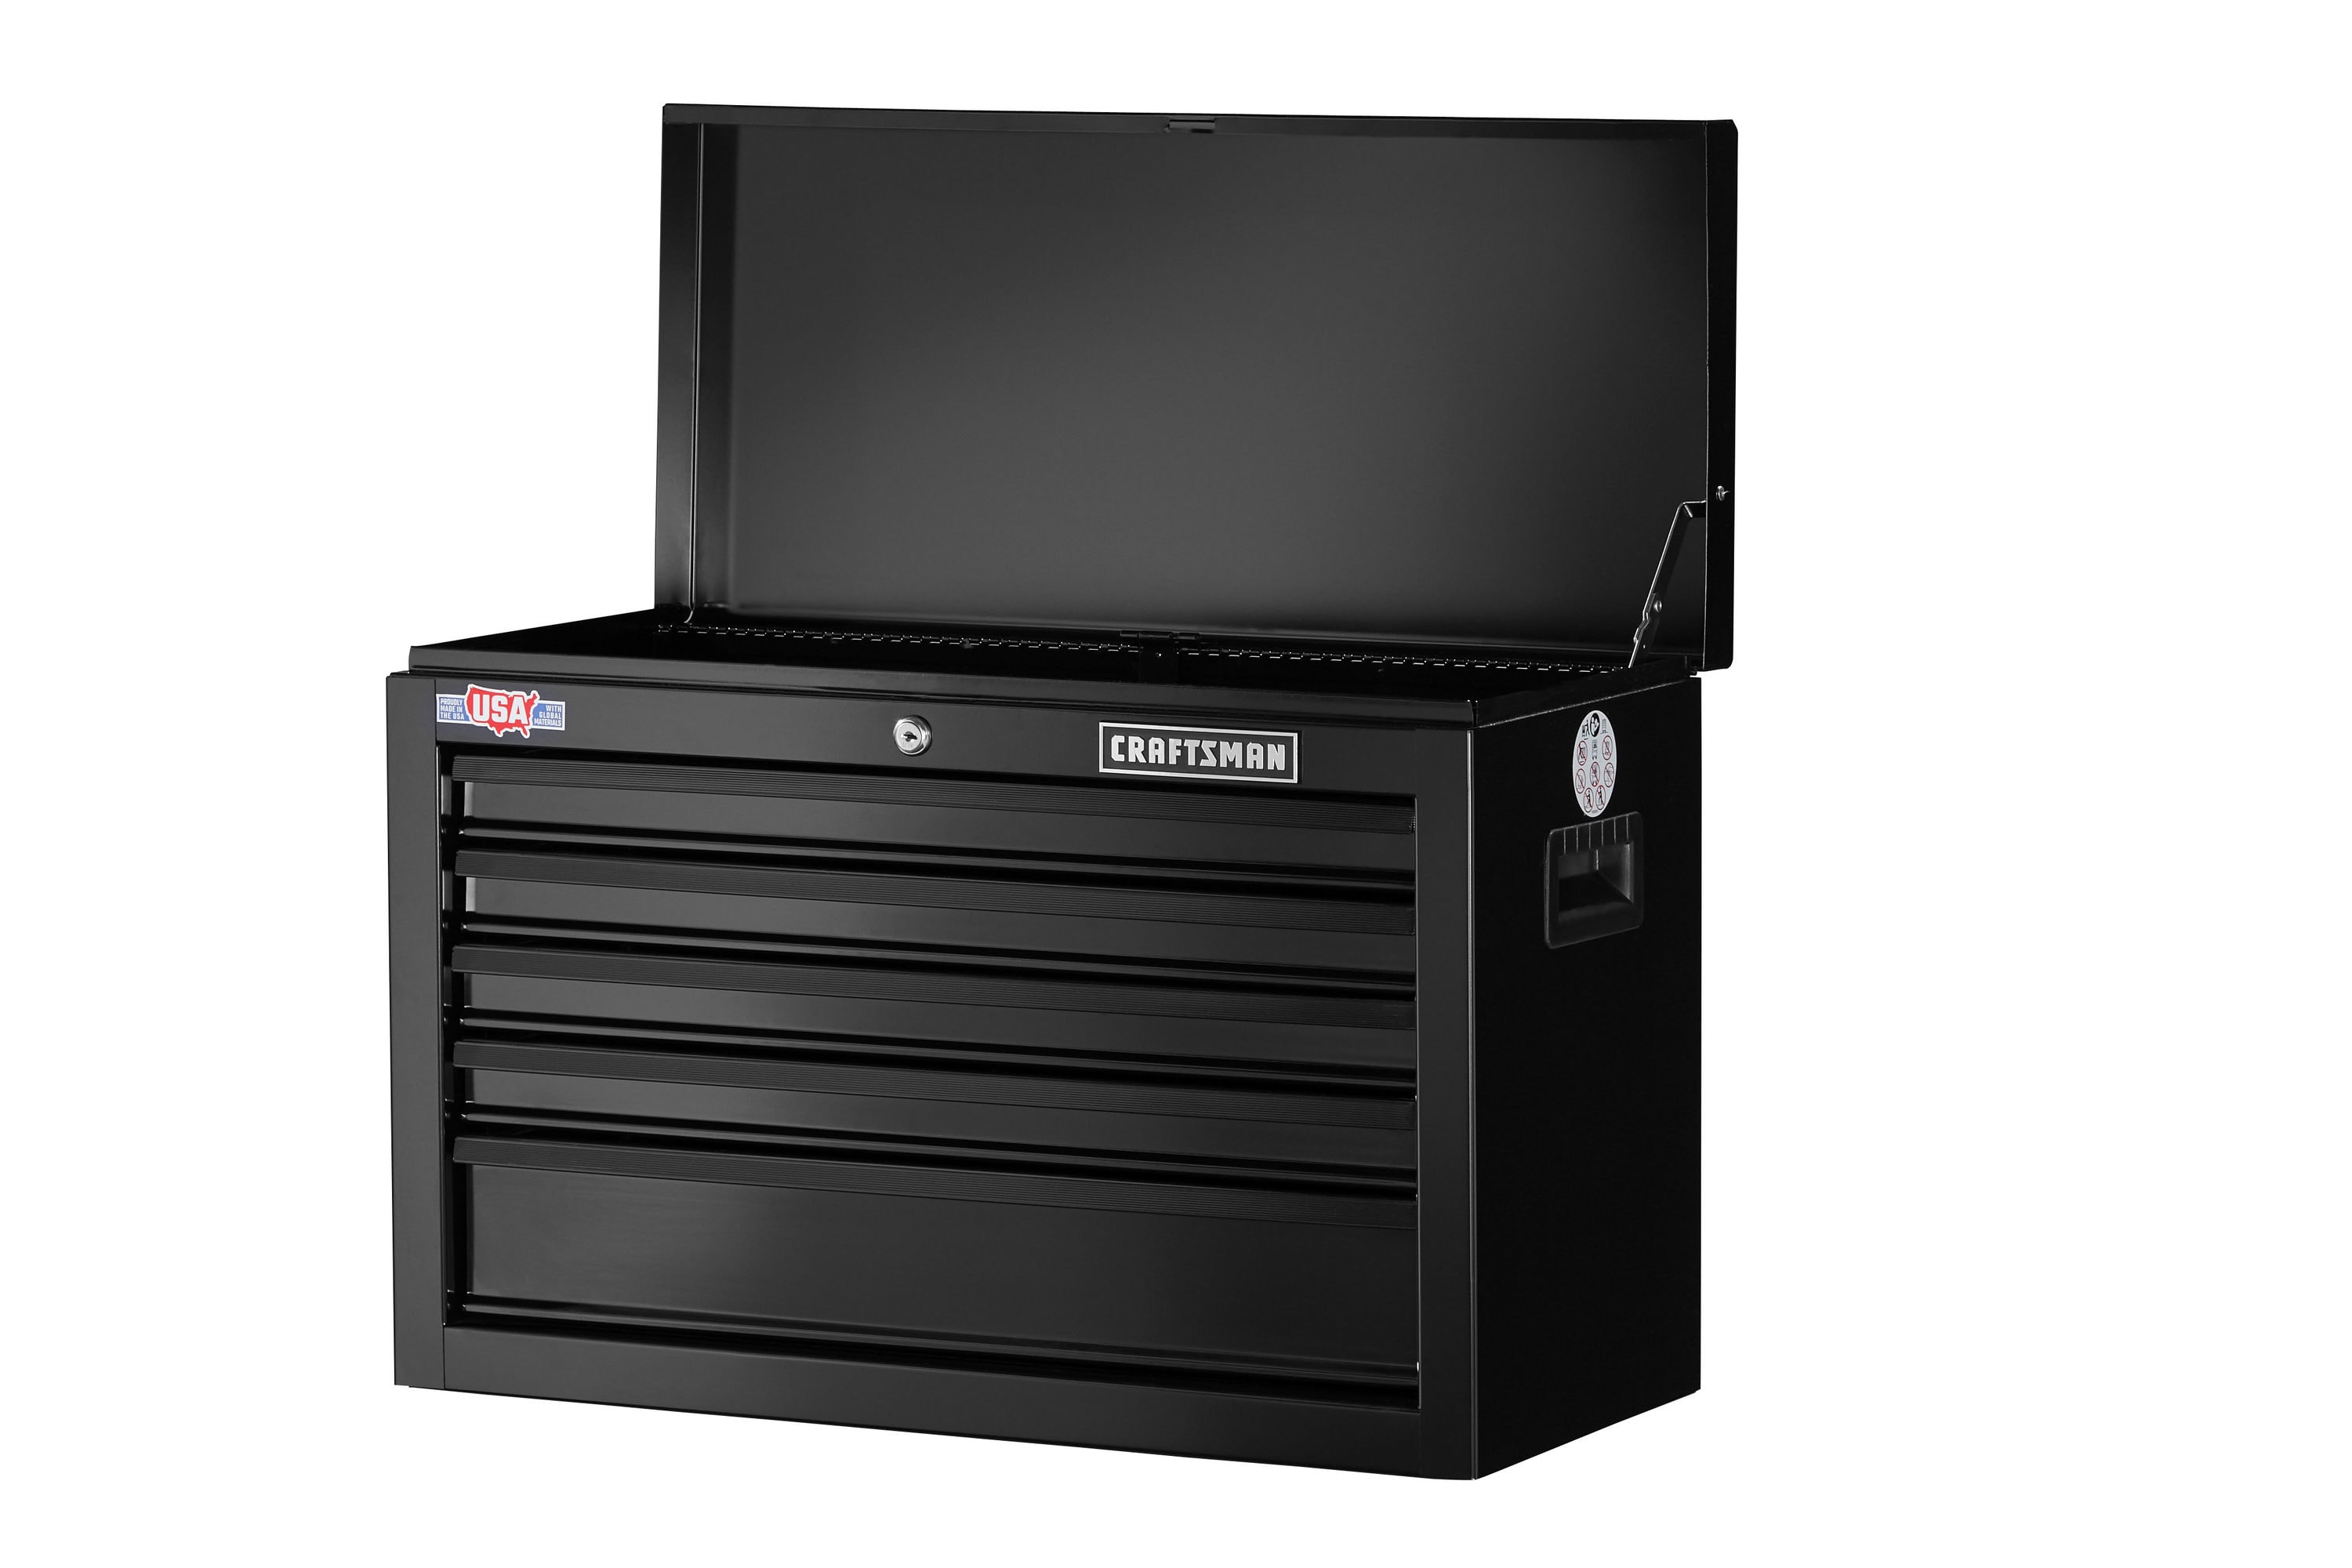 CRAFTSMAN 1000 Series 26-in W x 17.25-in H 5-Drawer Steel Tool Chest (Black)